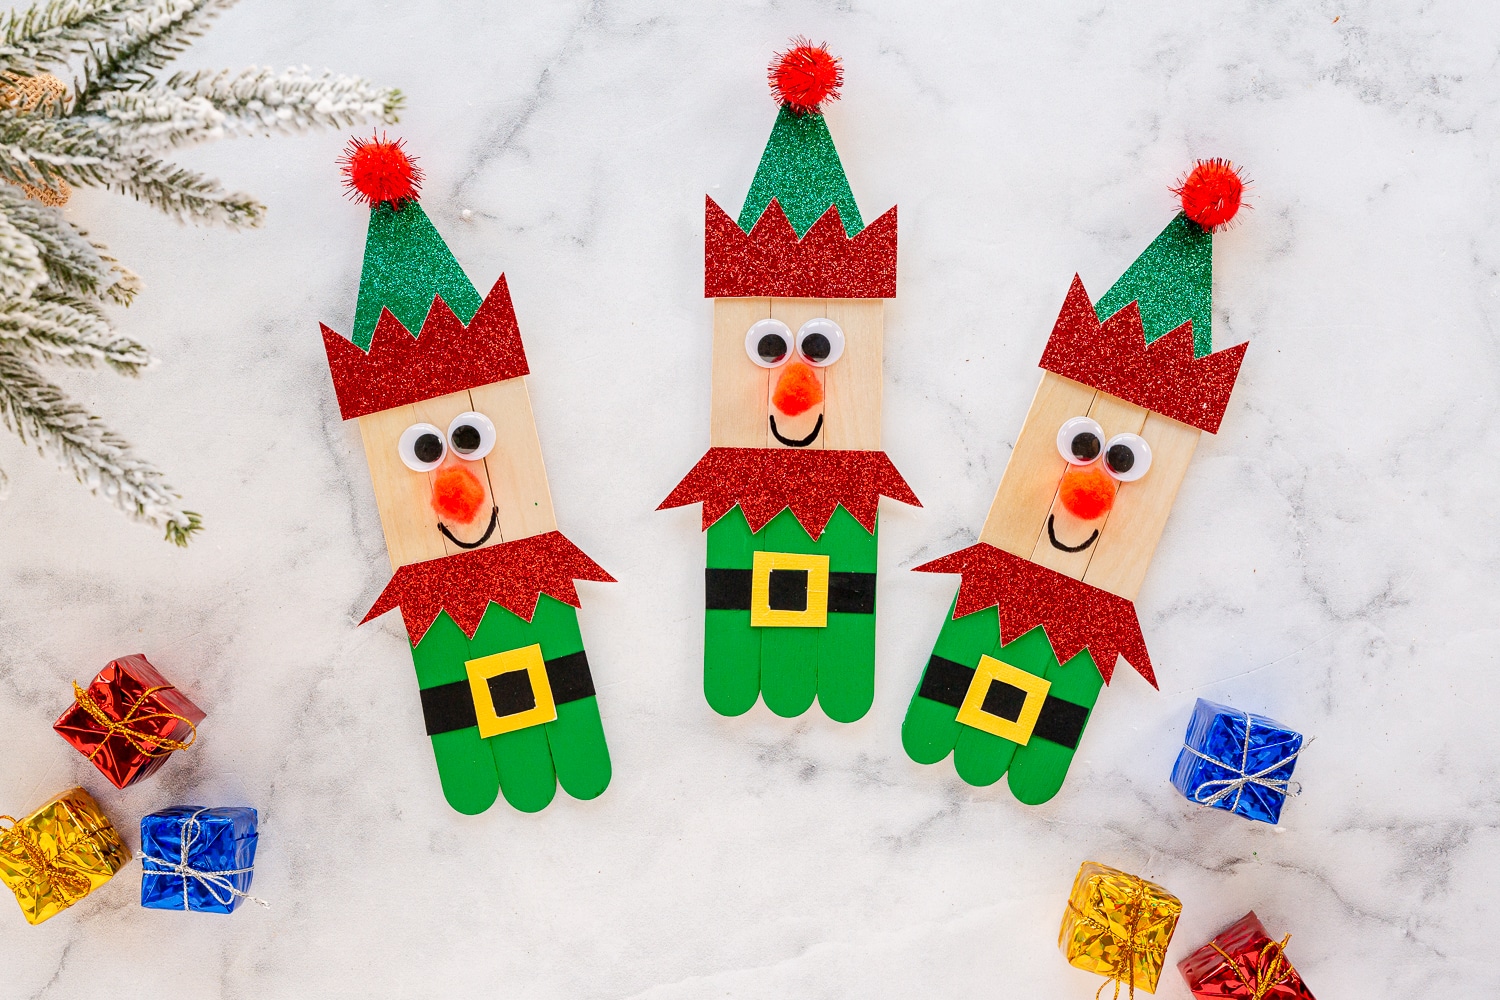 jumbo popsicle stick elves completed with small gift props